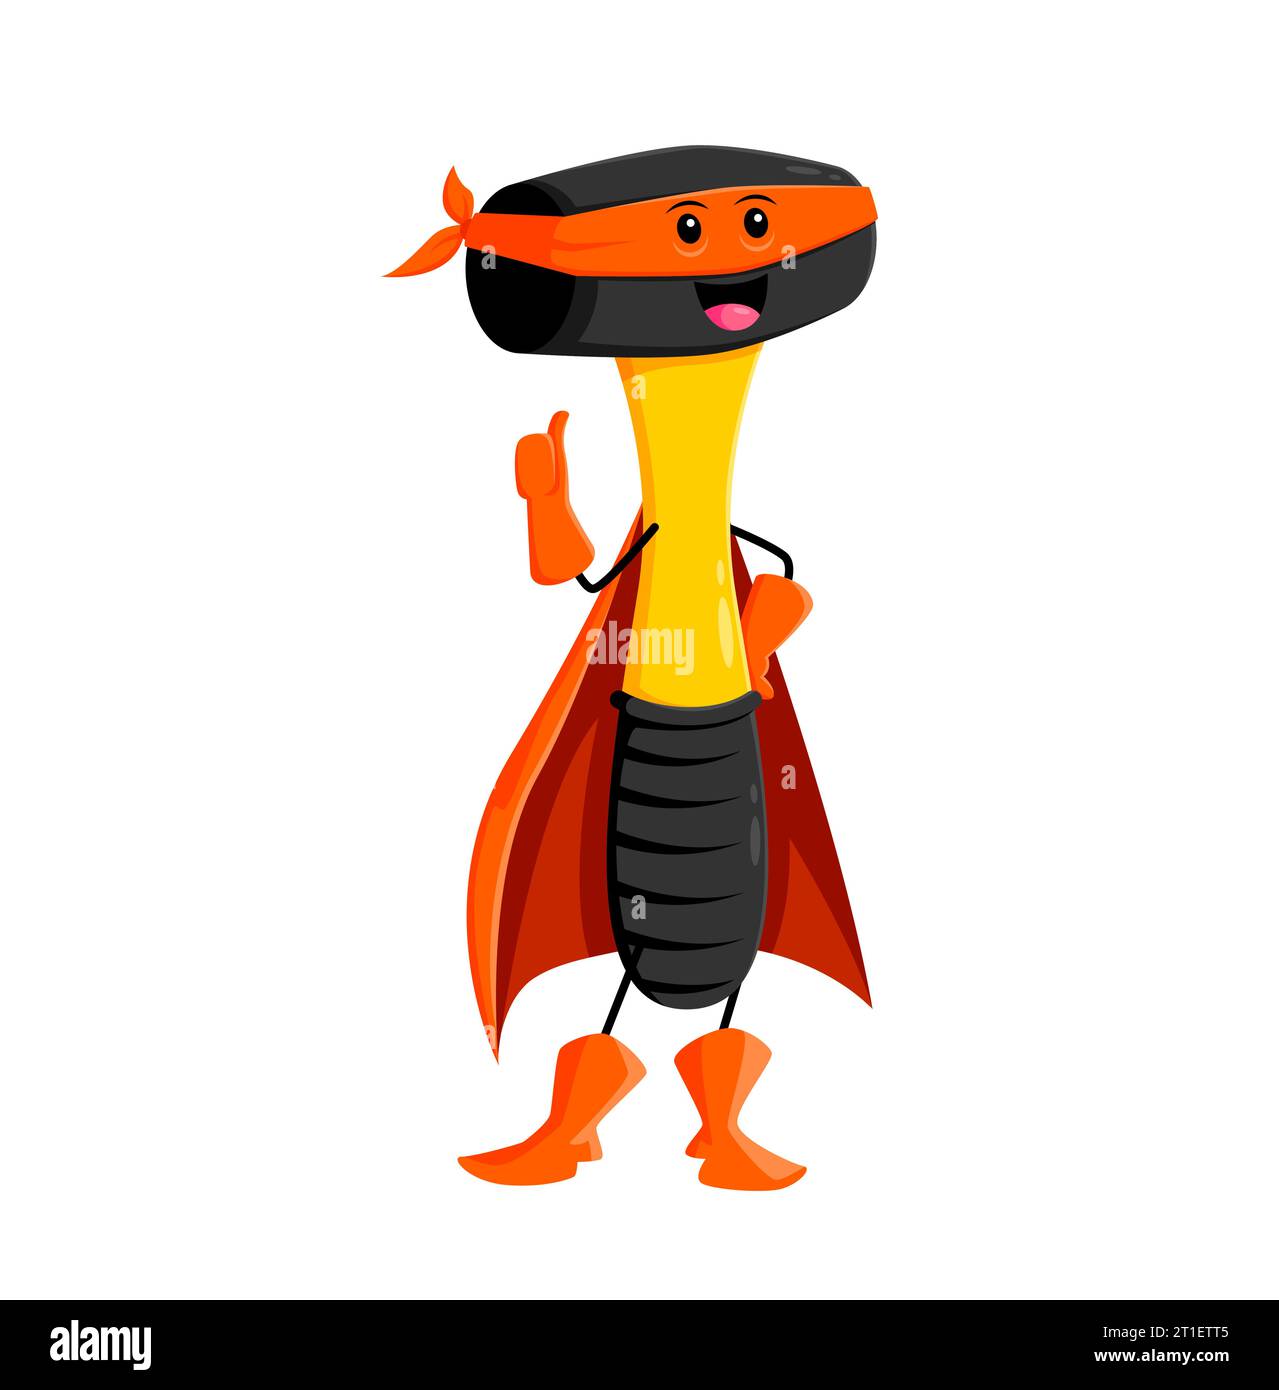 Cartoon mallet tool superhero character. Isolated vector Malletman super hero personage with a flair for smashing obstacles and solving problems, brings humor and creativity to construction adventure Stock Vector